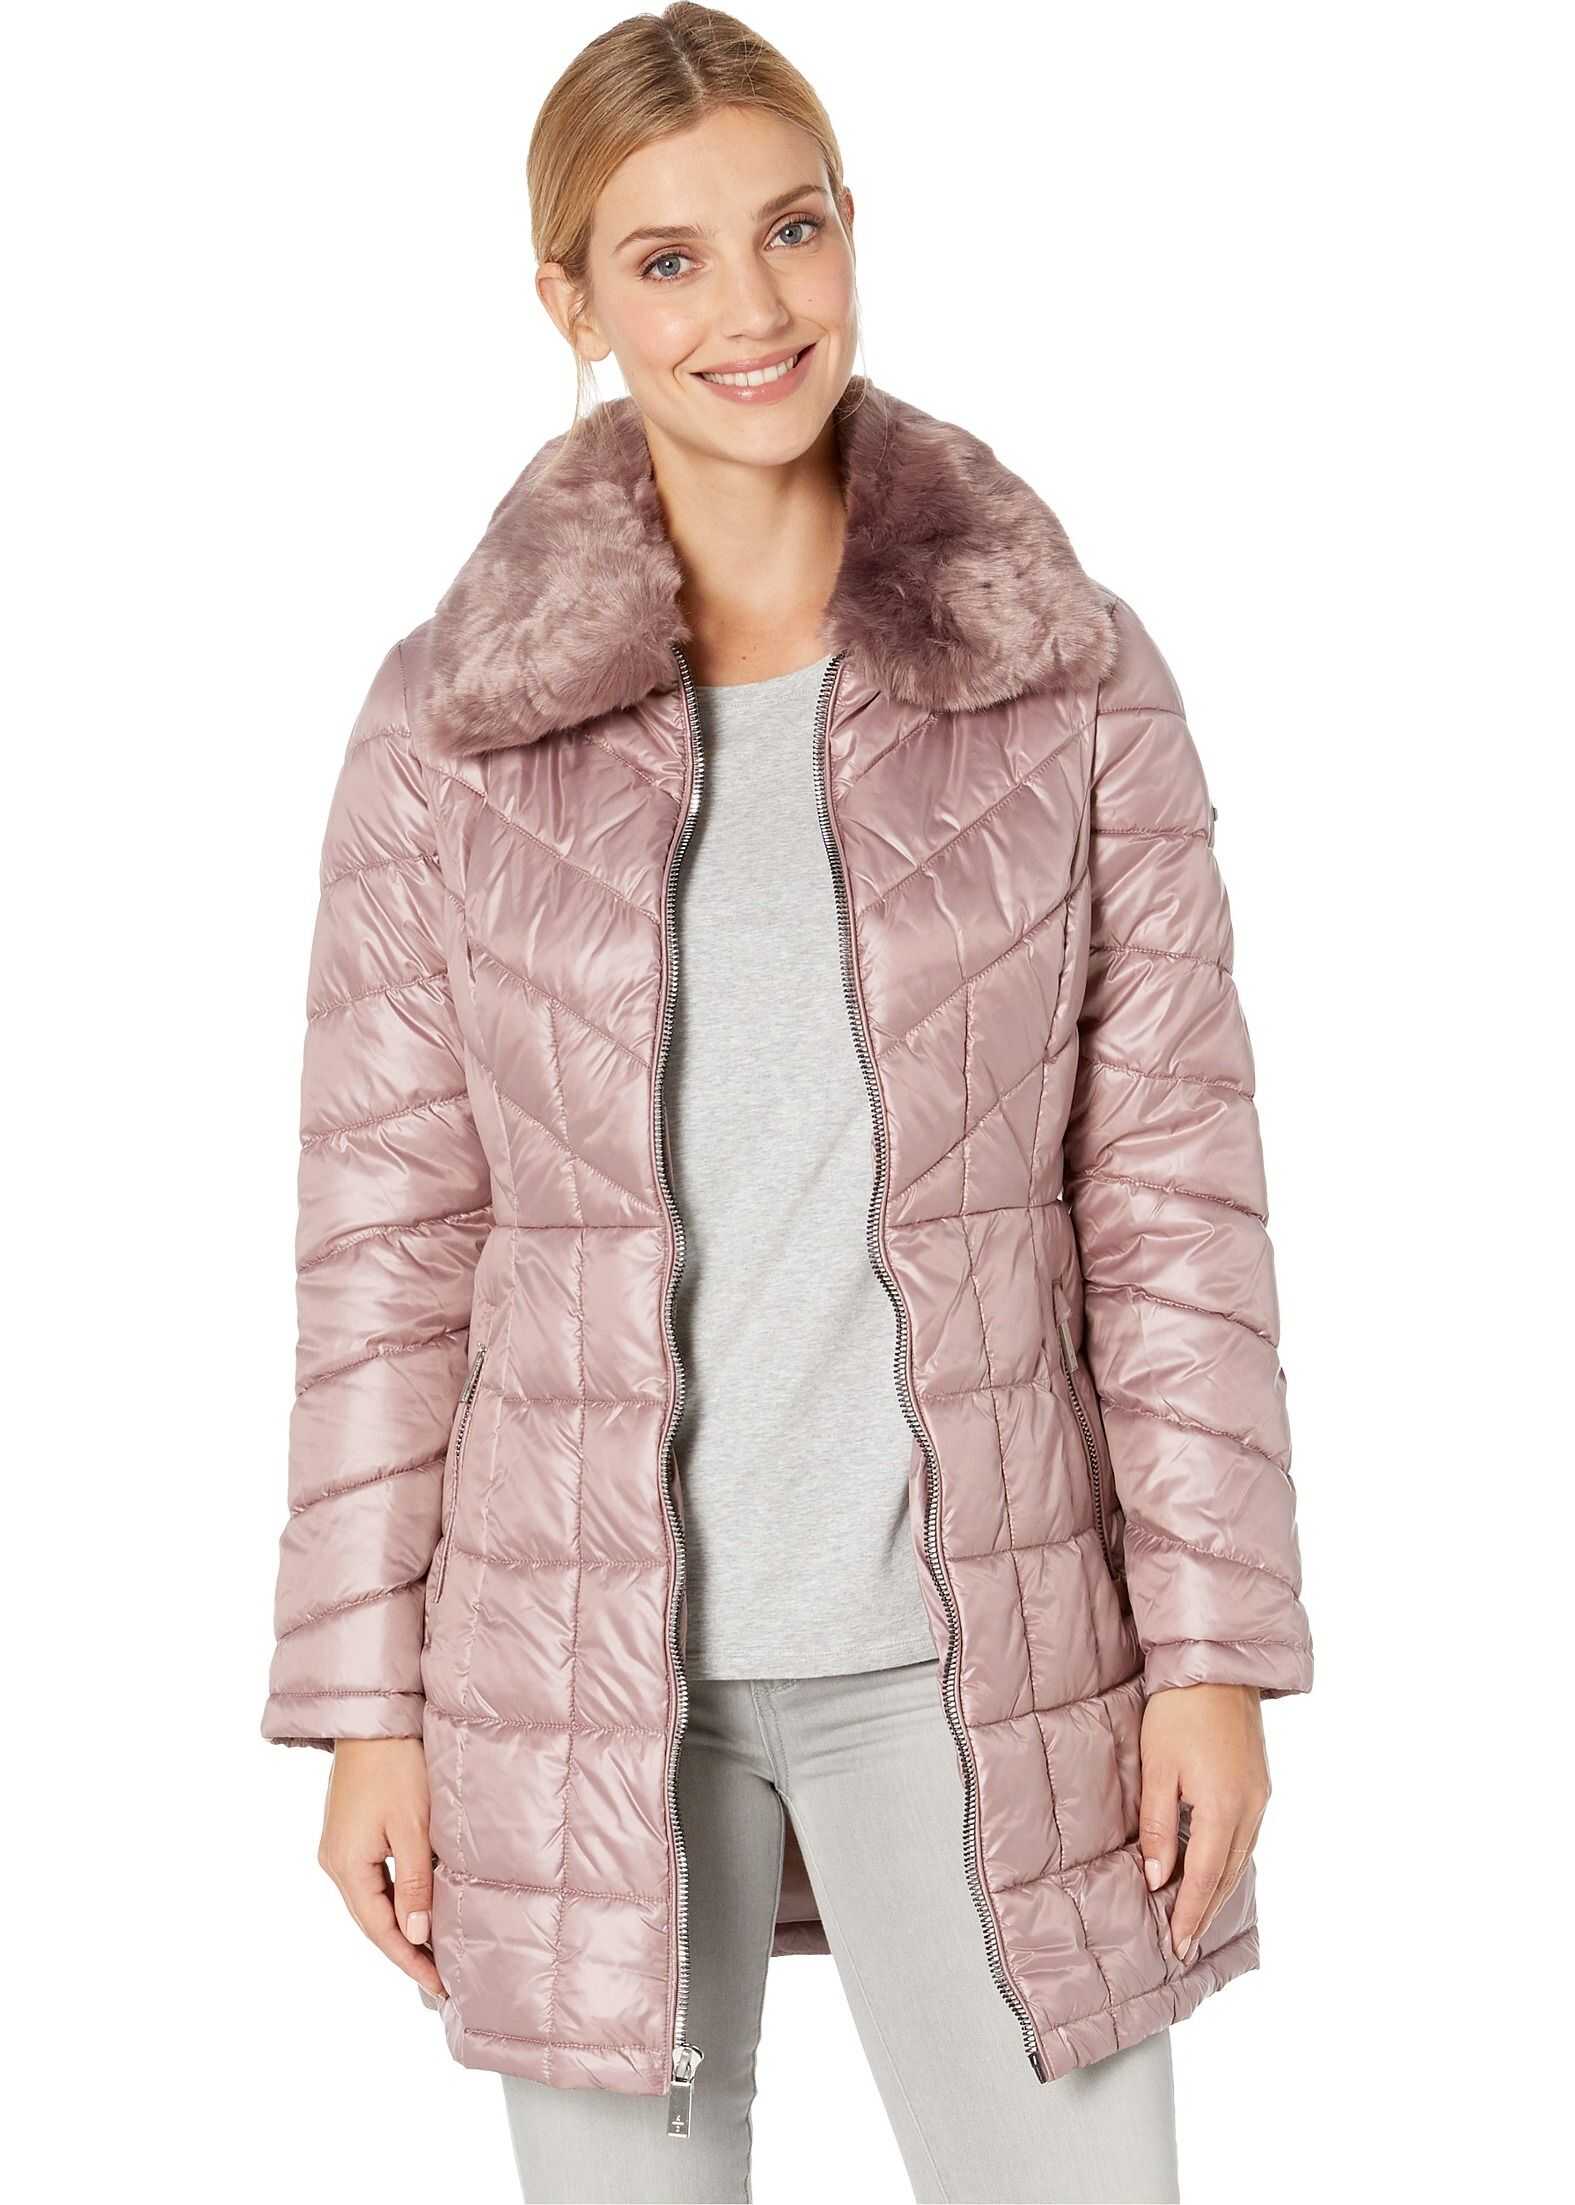 Kenneth Cole New York Zip Front Quilted Puffer w/ Faux Fur Trimmed Collar Dusty Rose